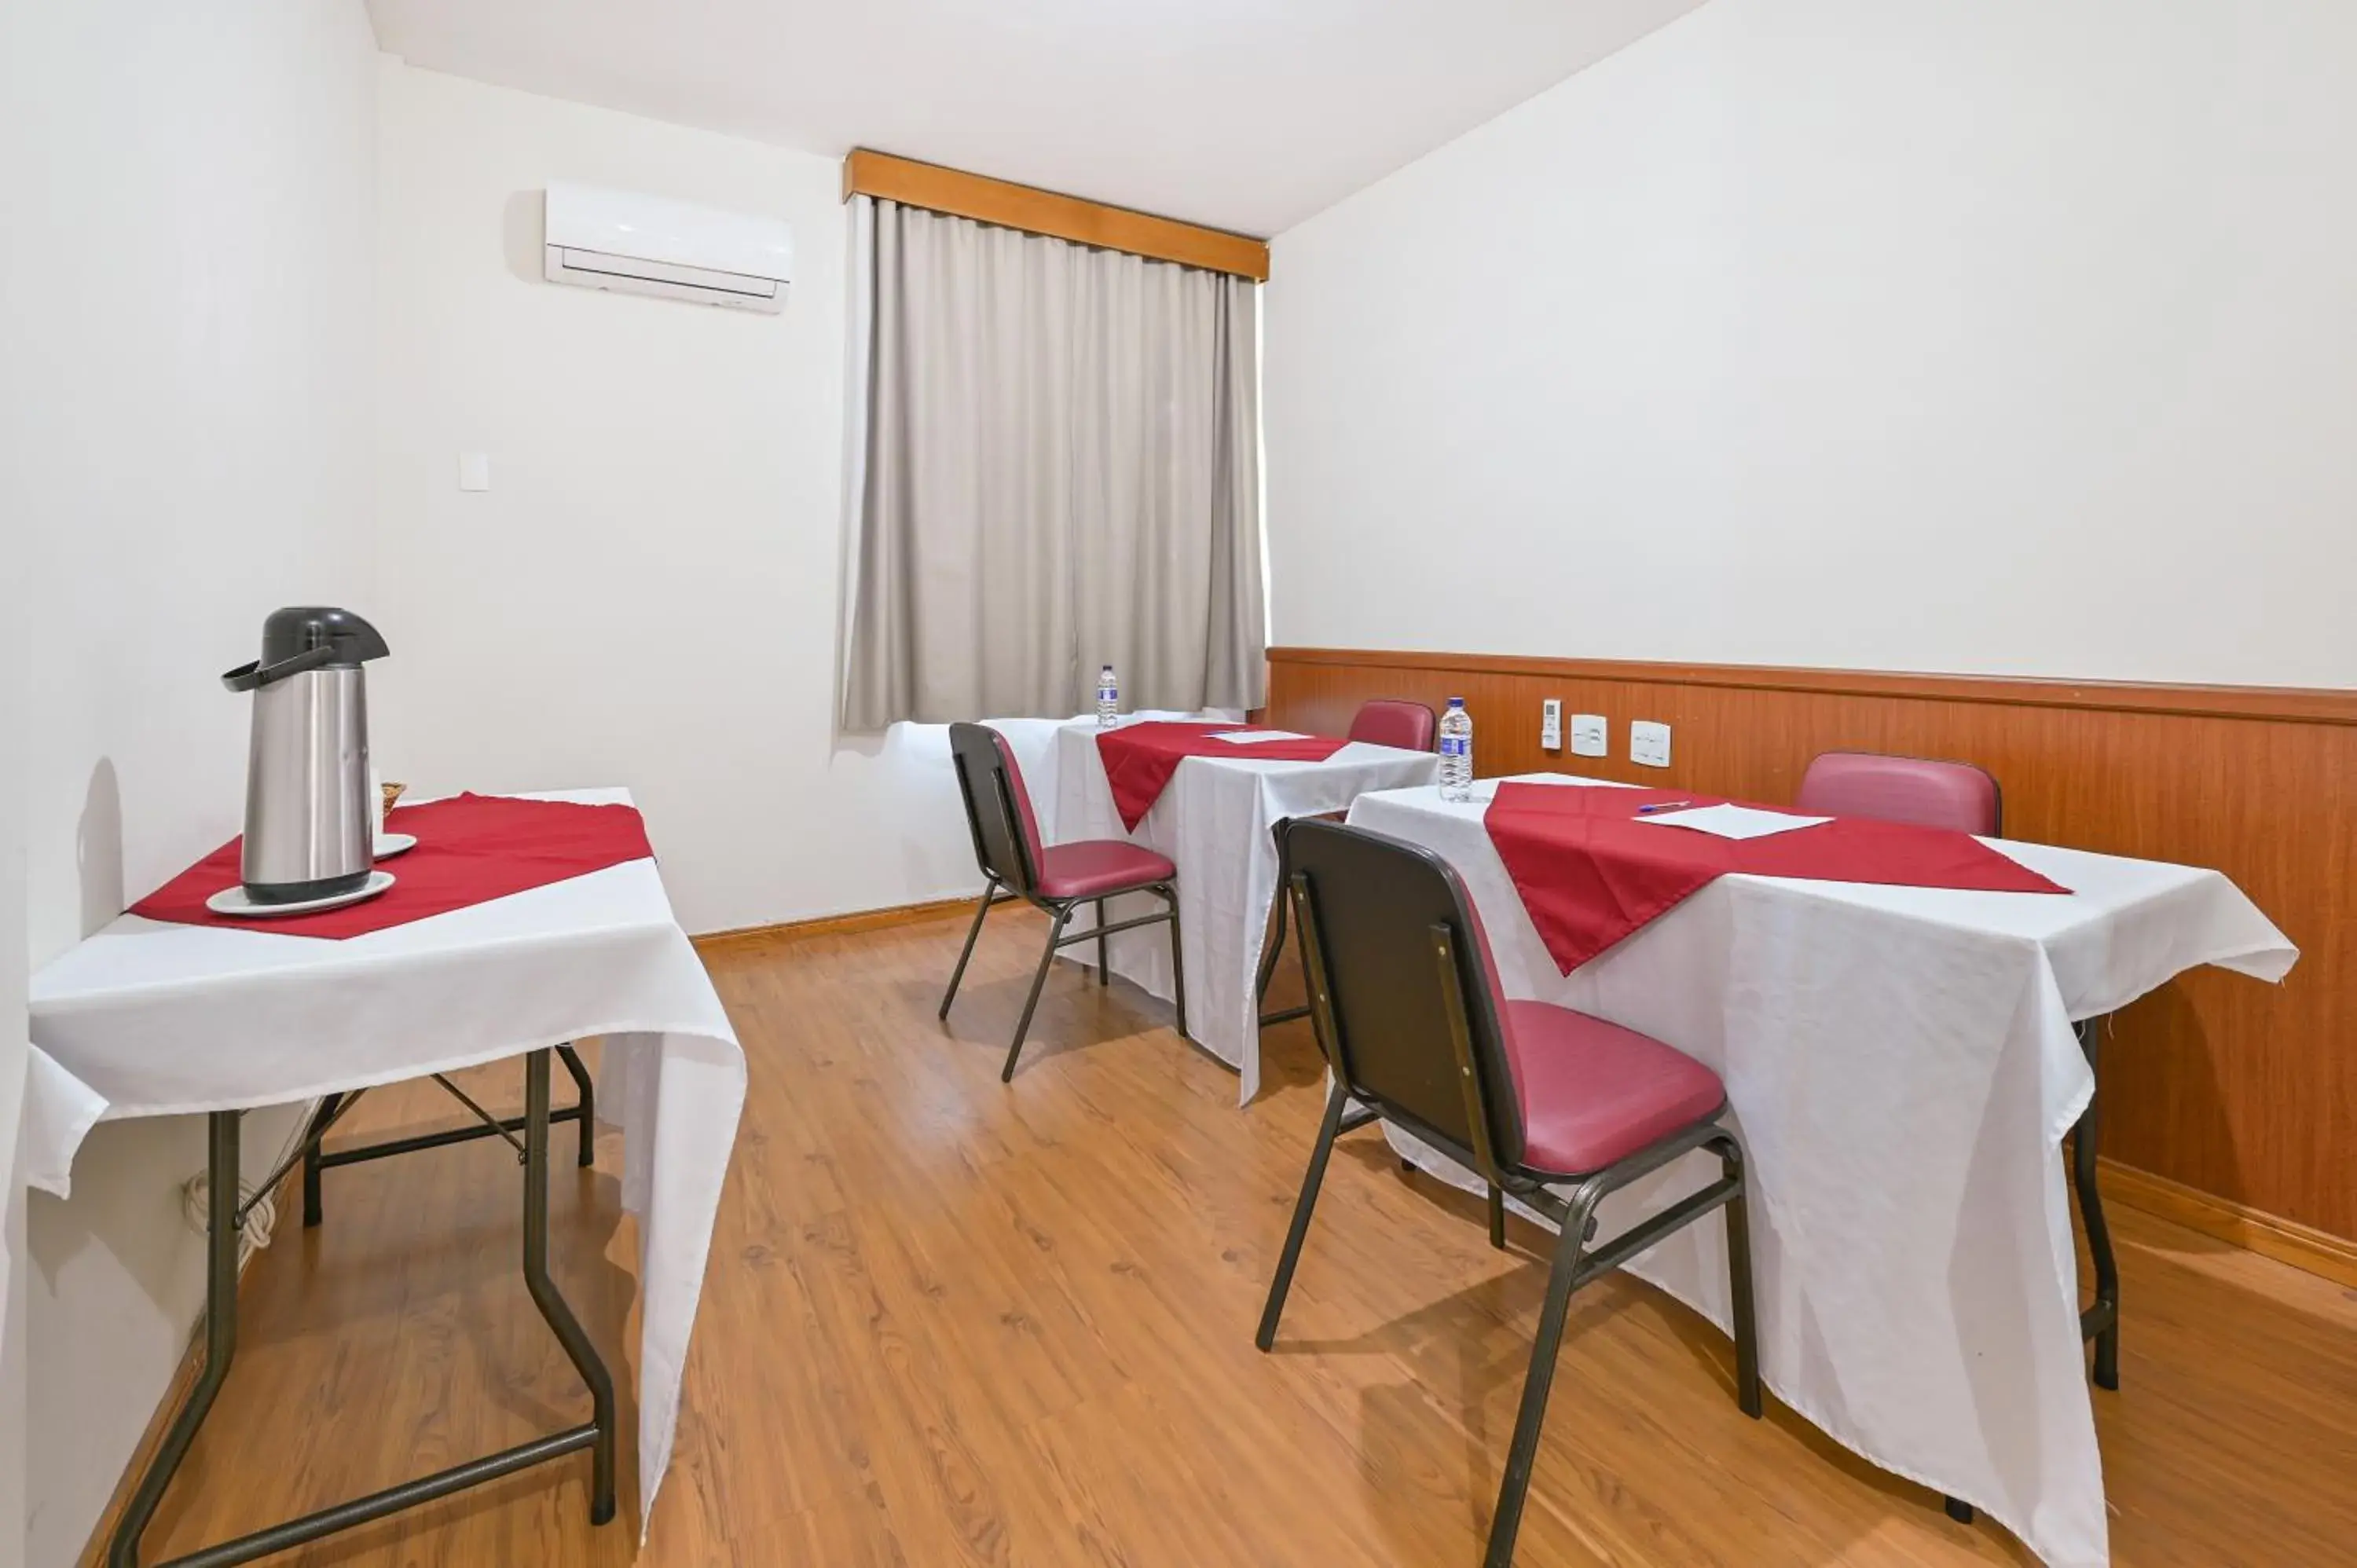 Meeting/conference room in Nacional Inn Limeira